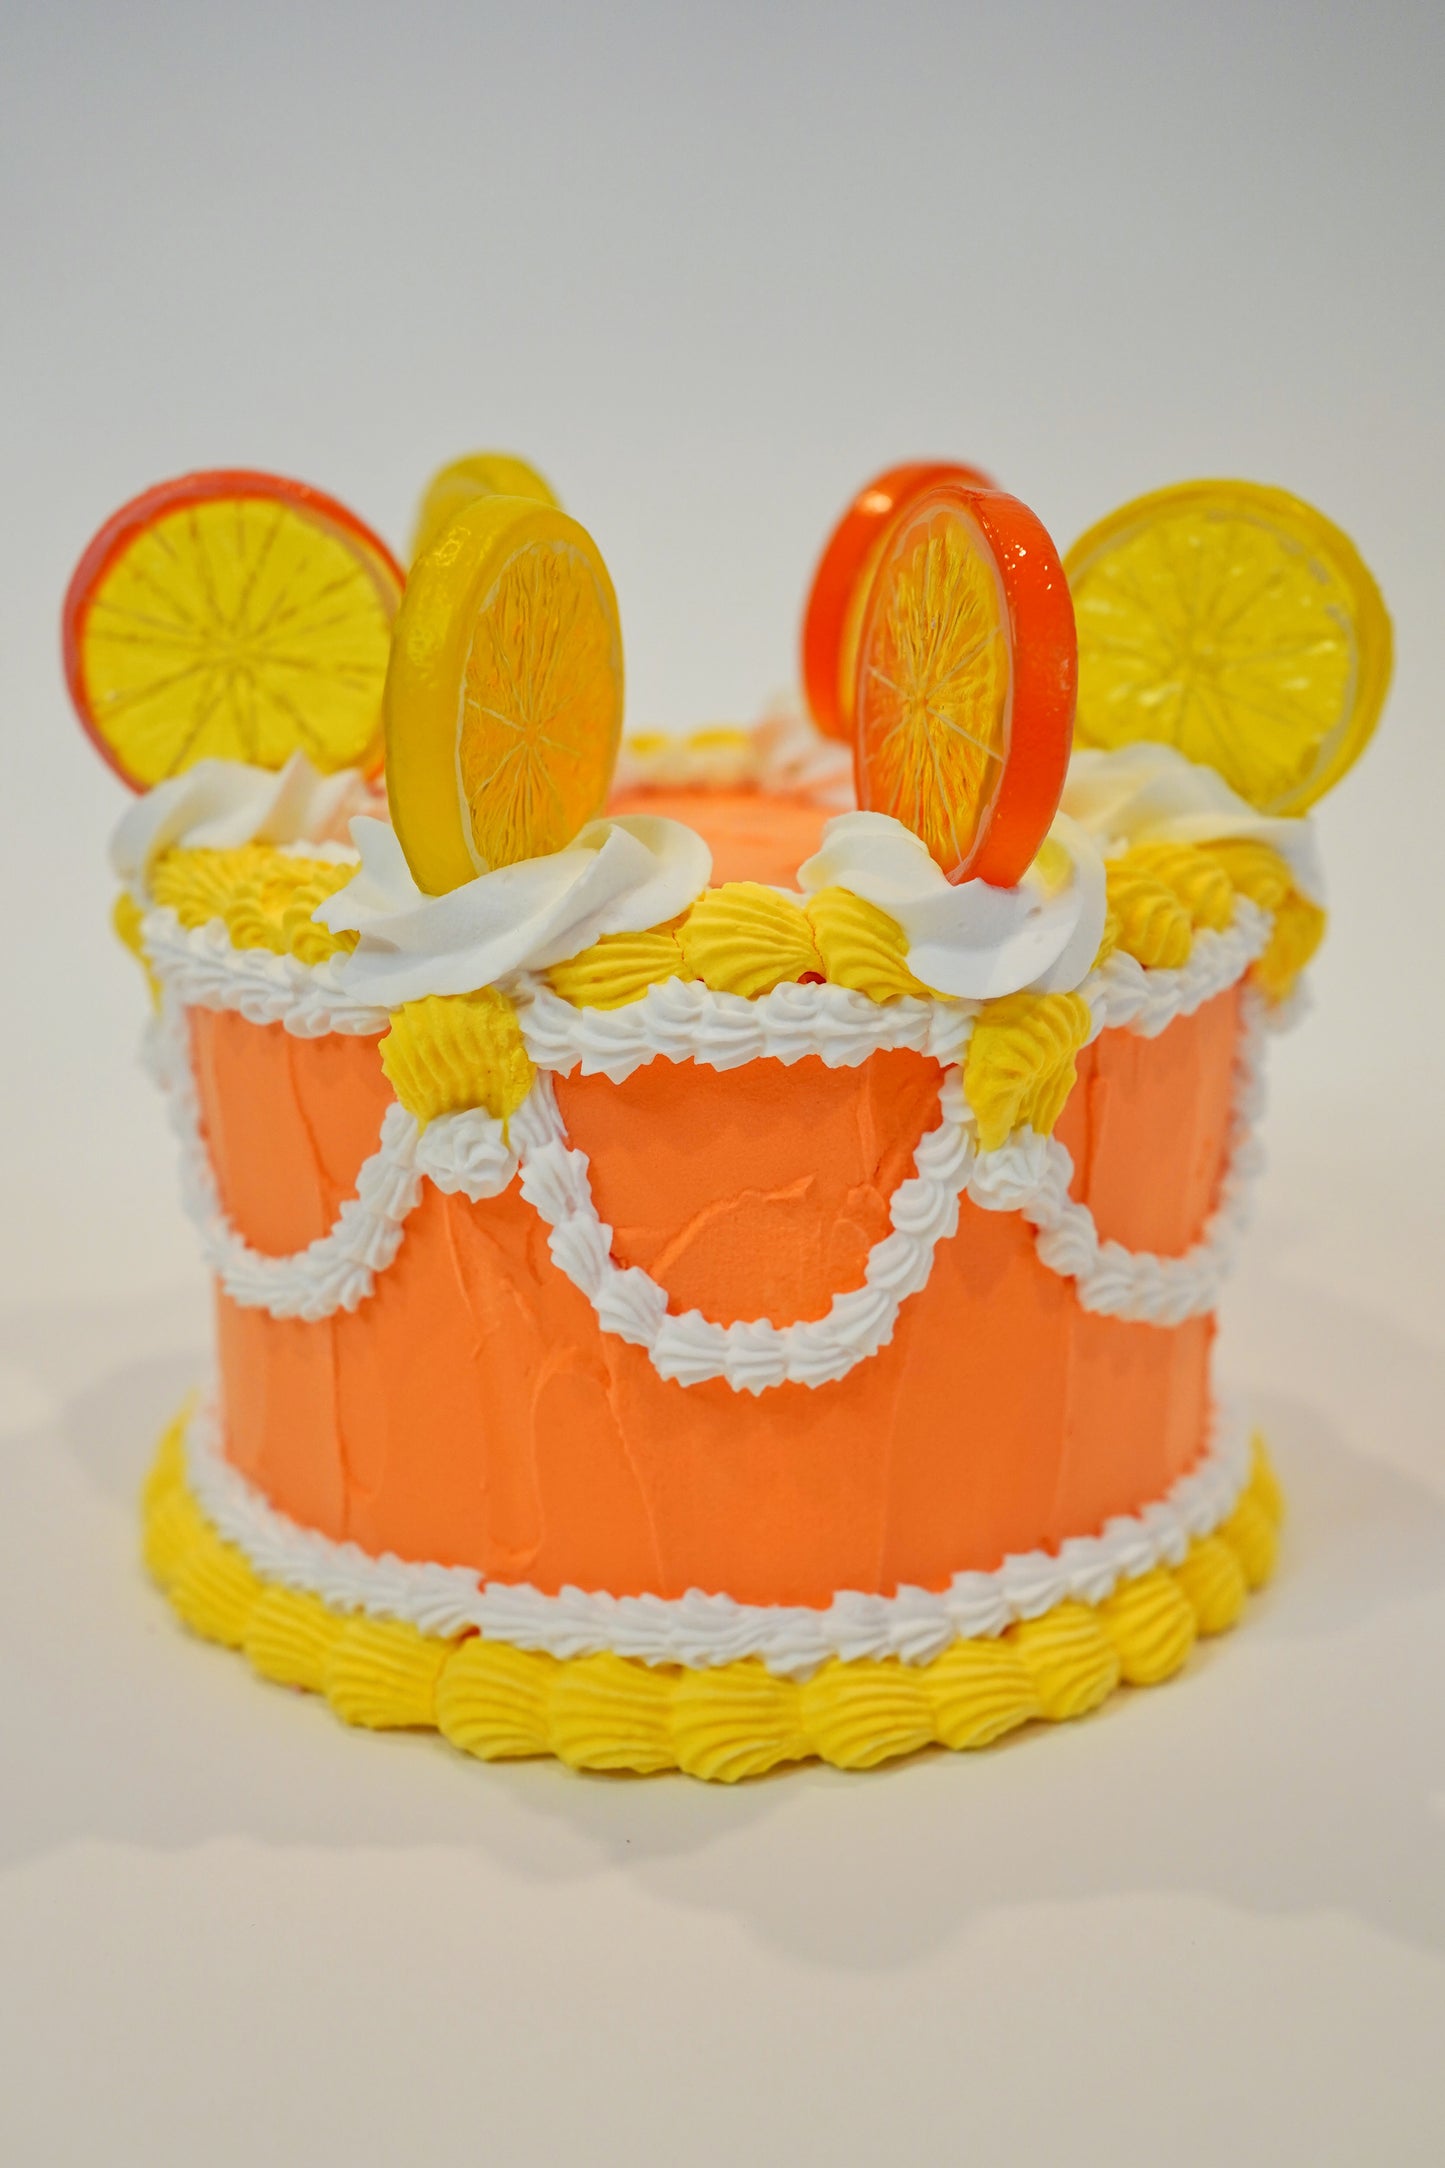 Vintage Medium Citrus Cake in Orange, Yellow and White with Fruit on Top